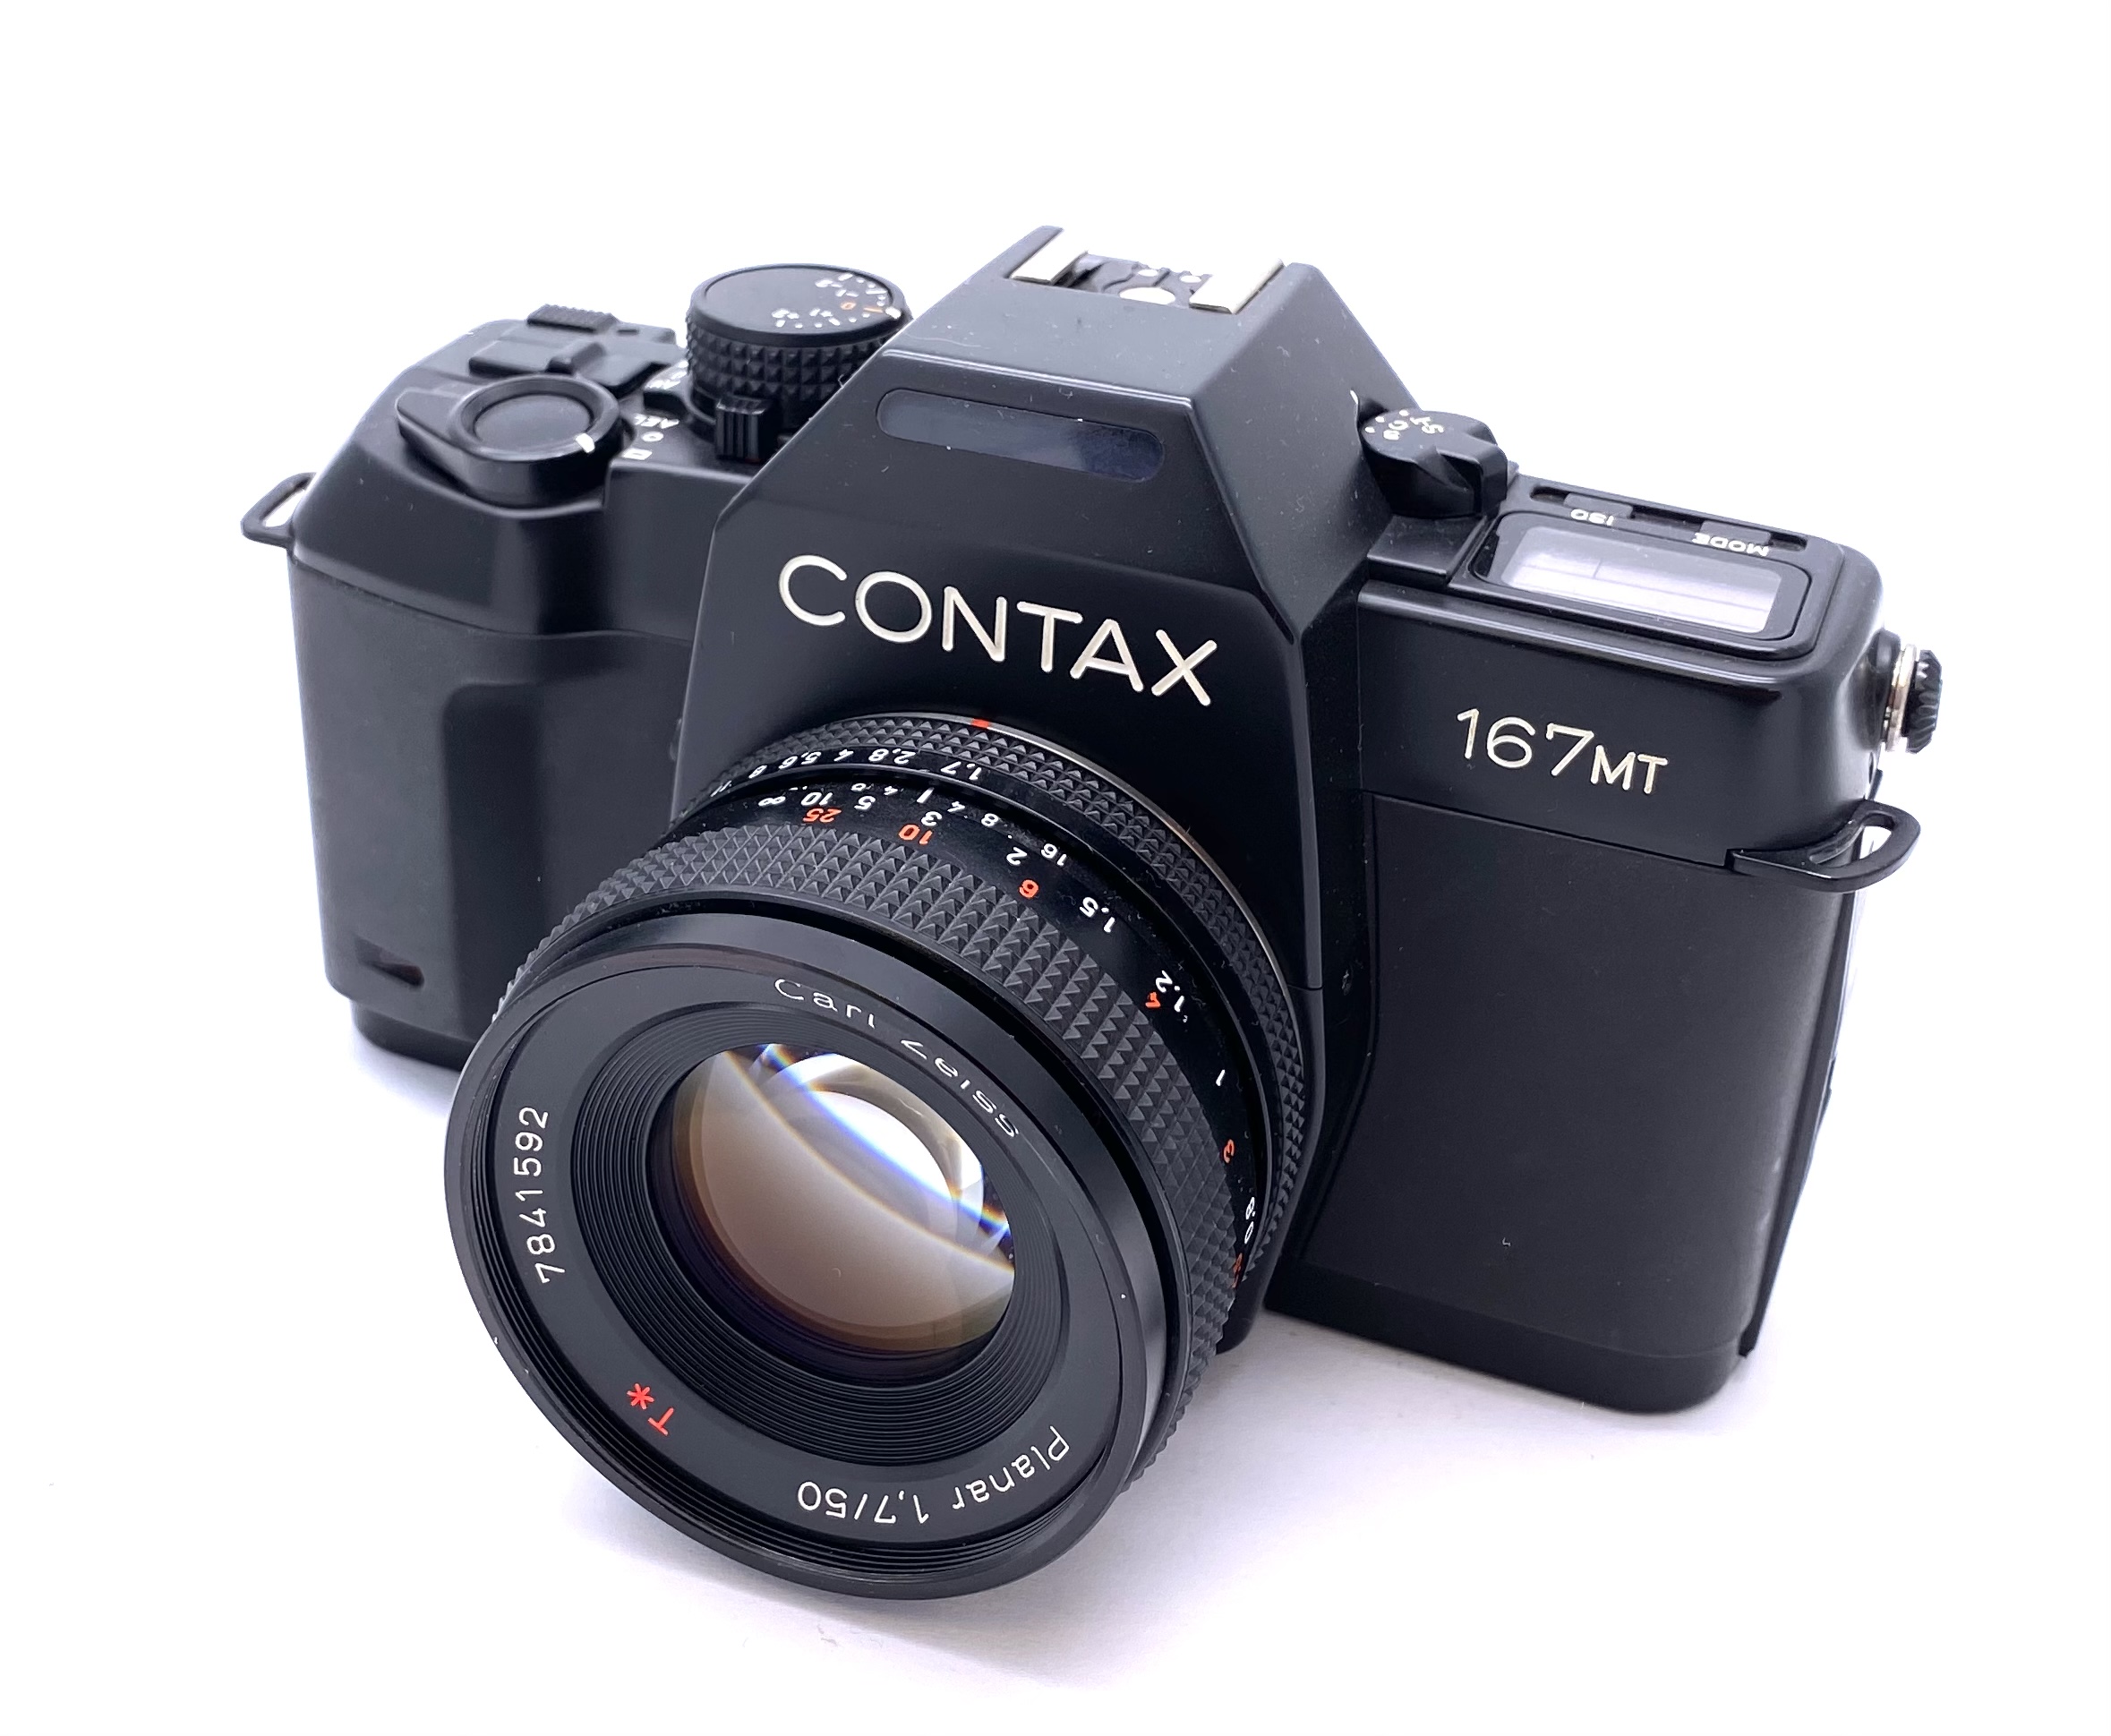 Contax 167MT 35mm SLR with 50mm F1.7 Planar #8501